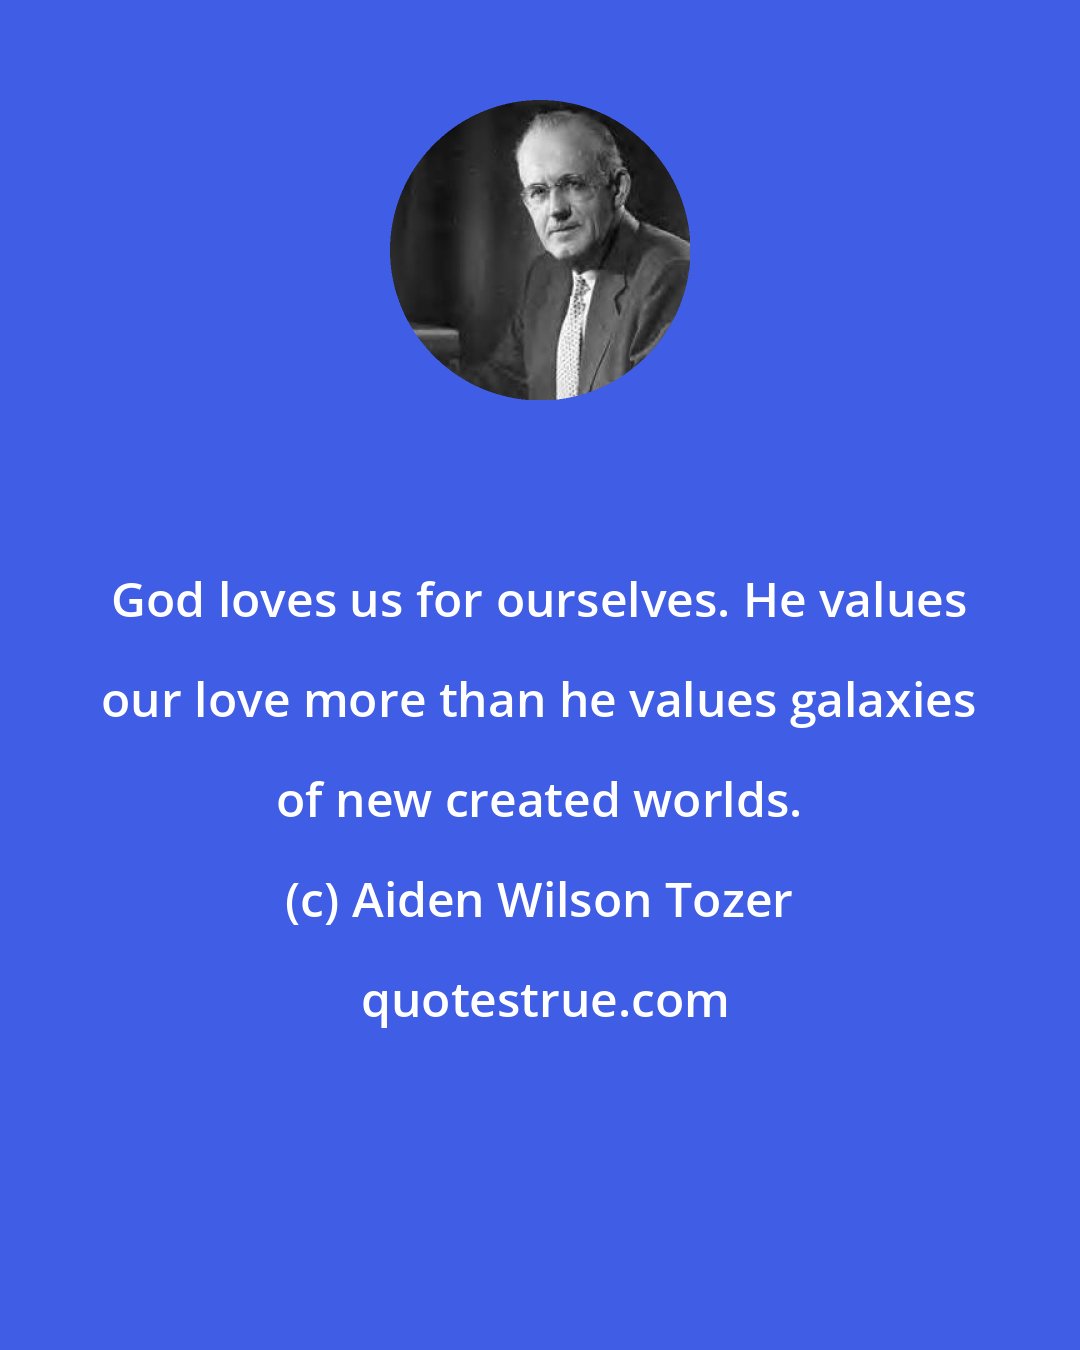 Aiden Wilson Tozer: God loves us for ourselves. He values our love more than he values galaxies of new created worlds.